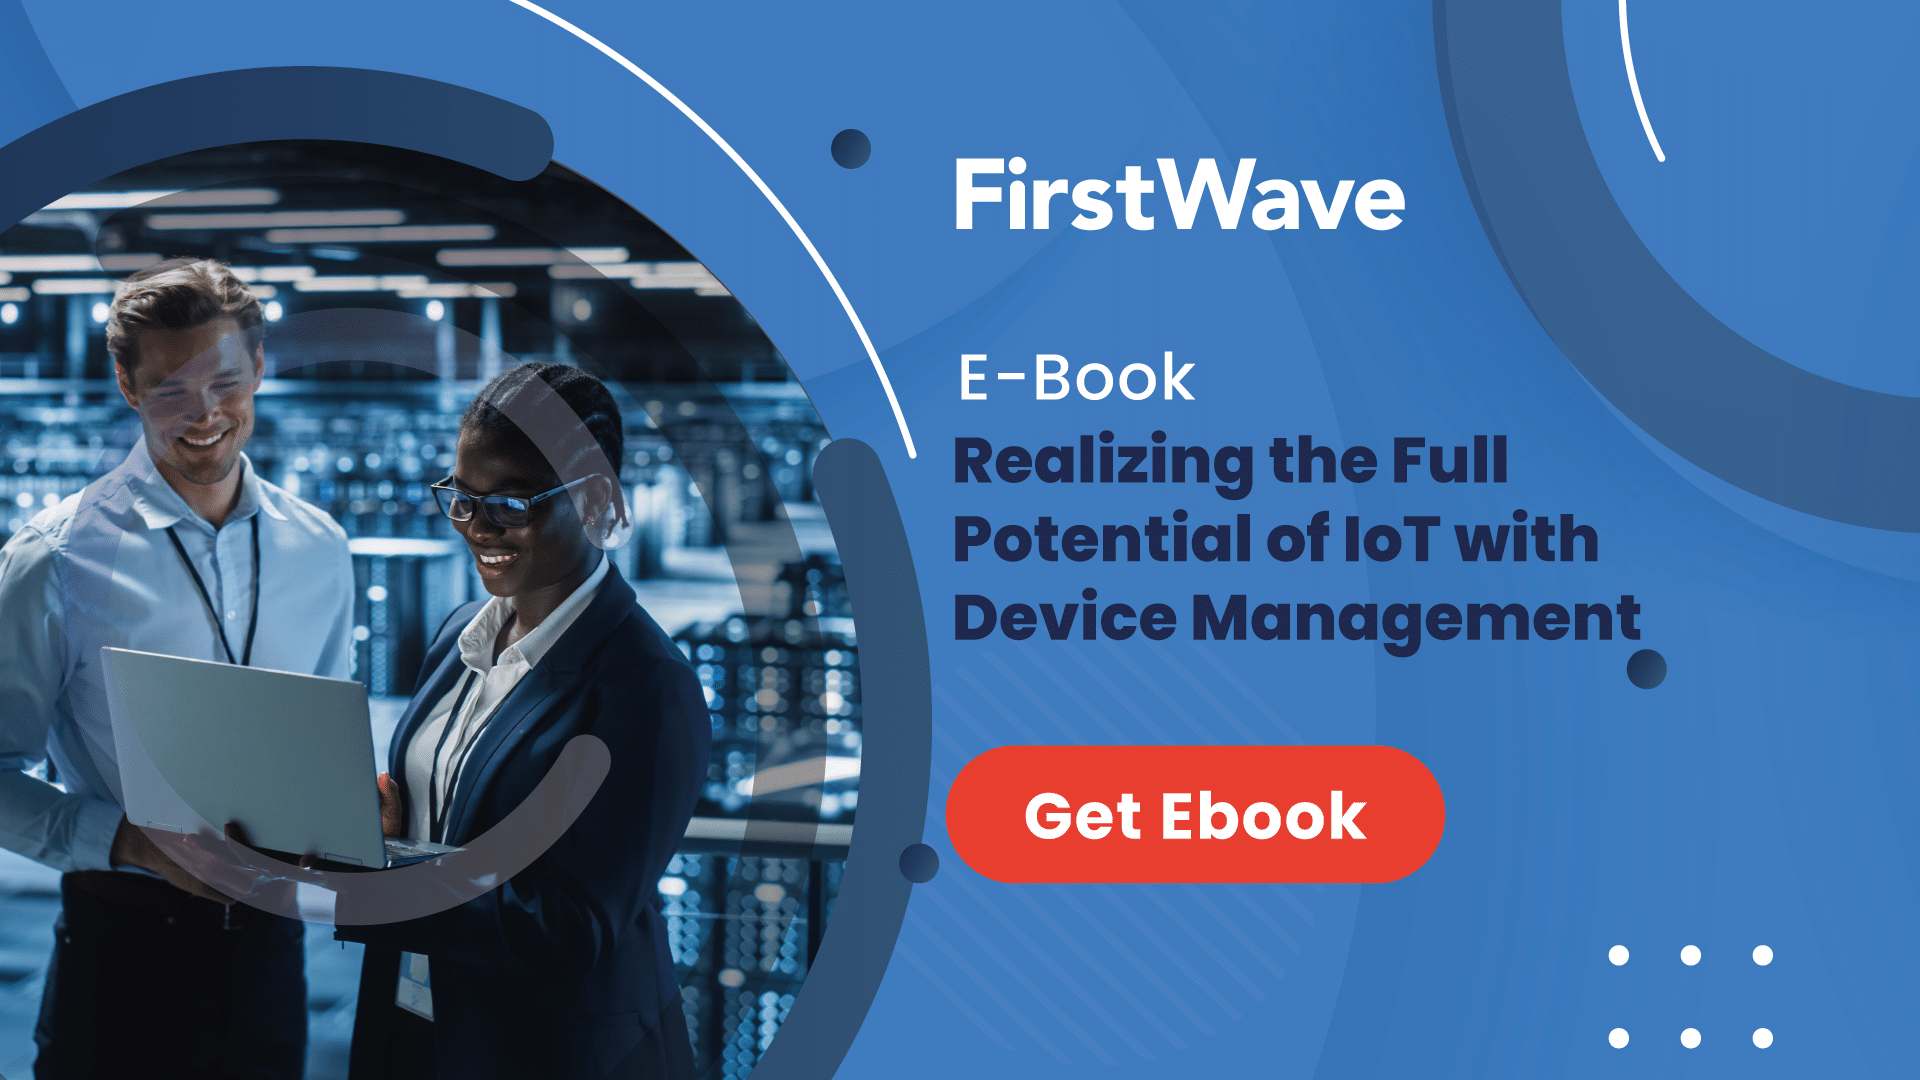 [E-Book] Realizing the Full Potential of IoT with Device Management